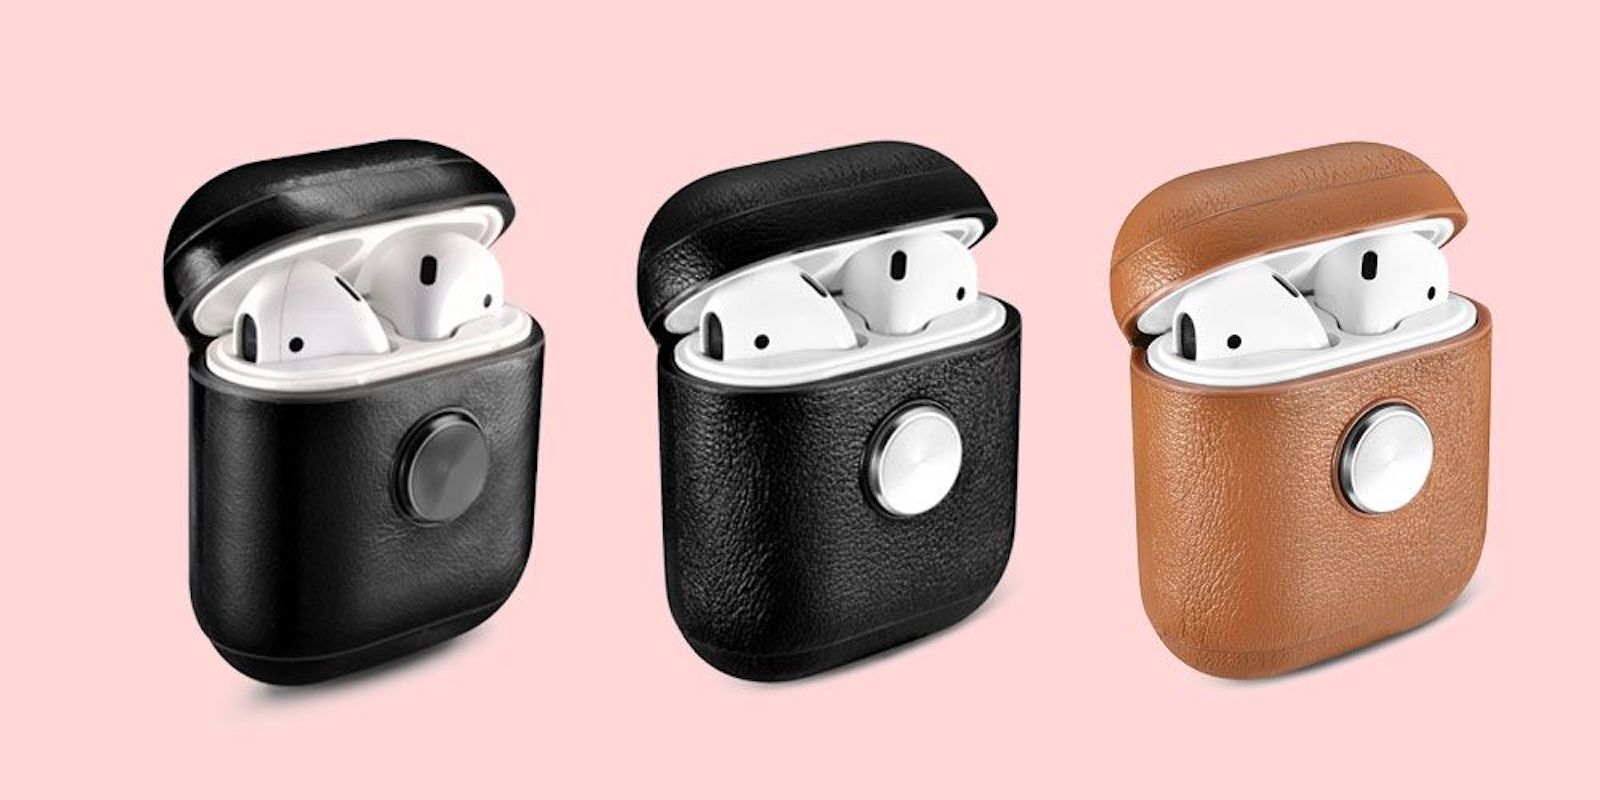 This stylish AirPod 2 charging case does double duty as a mind-relaxing fidget spinner.